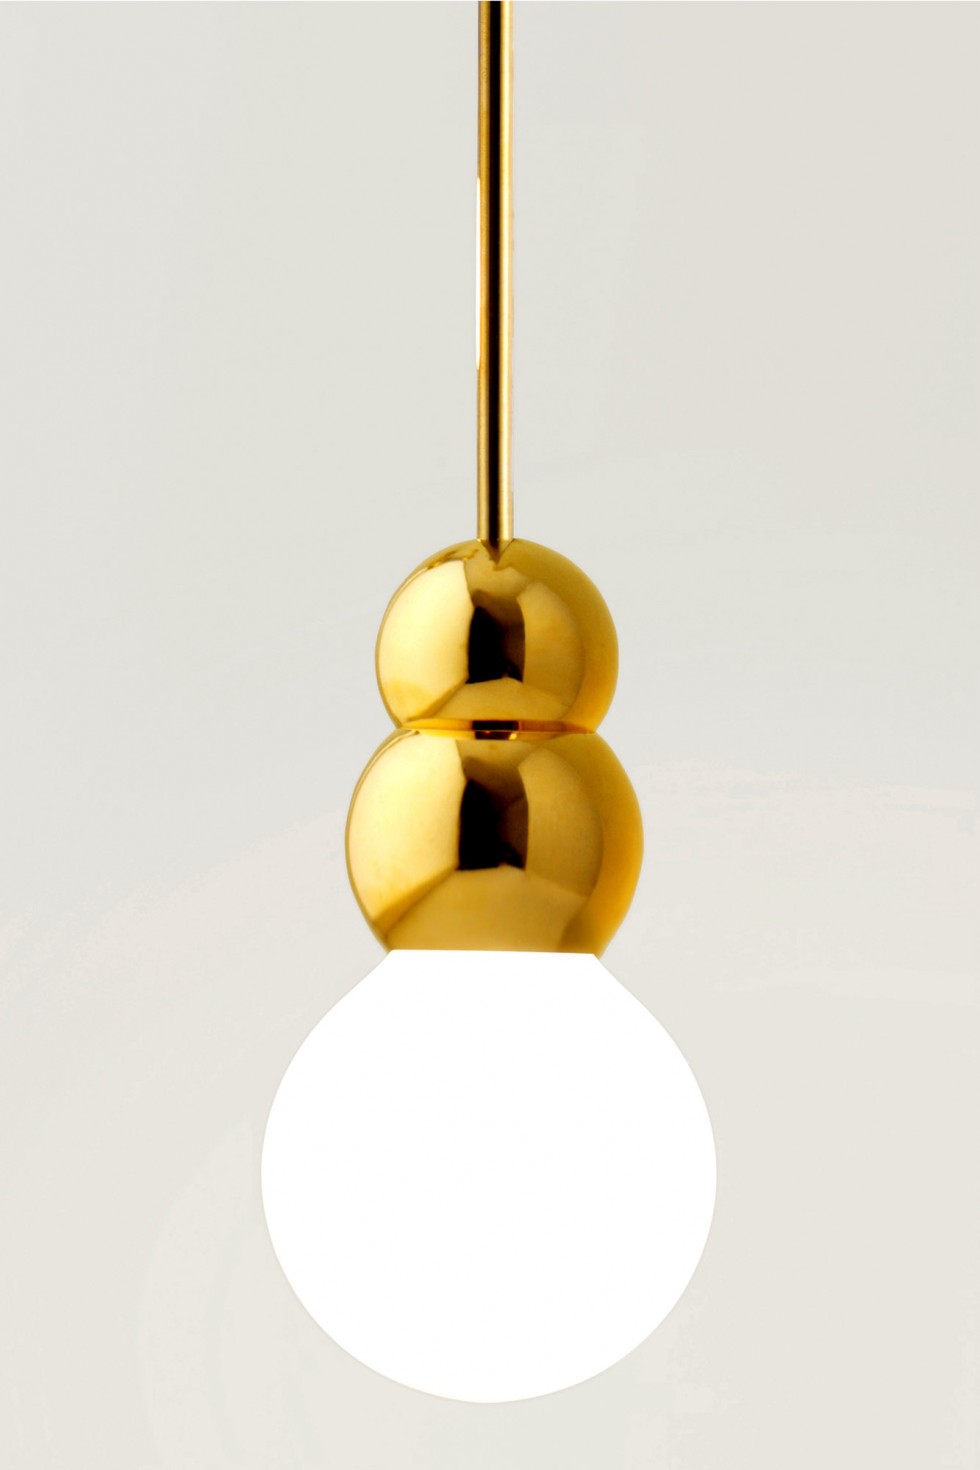 "Theater of Suspension worlds best ceiling lamps- Michael Anastassiades"